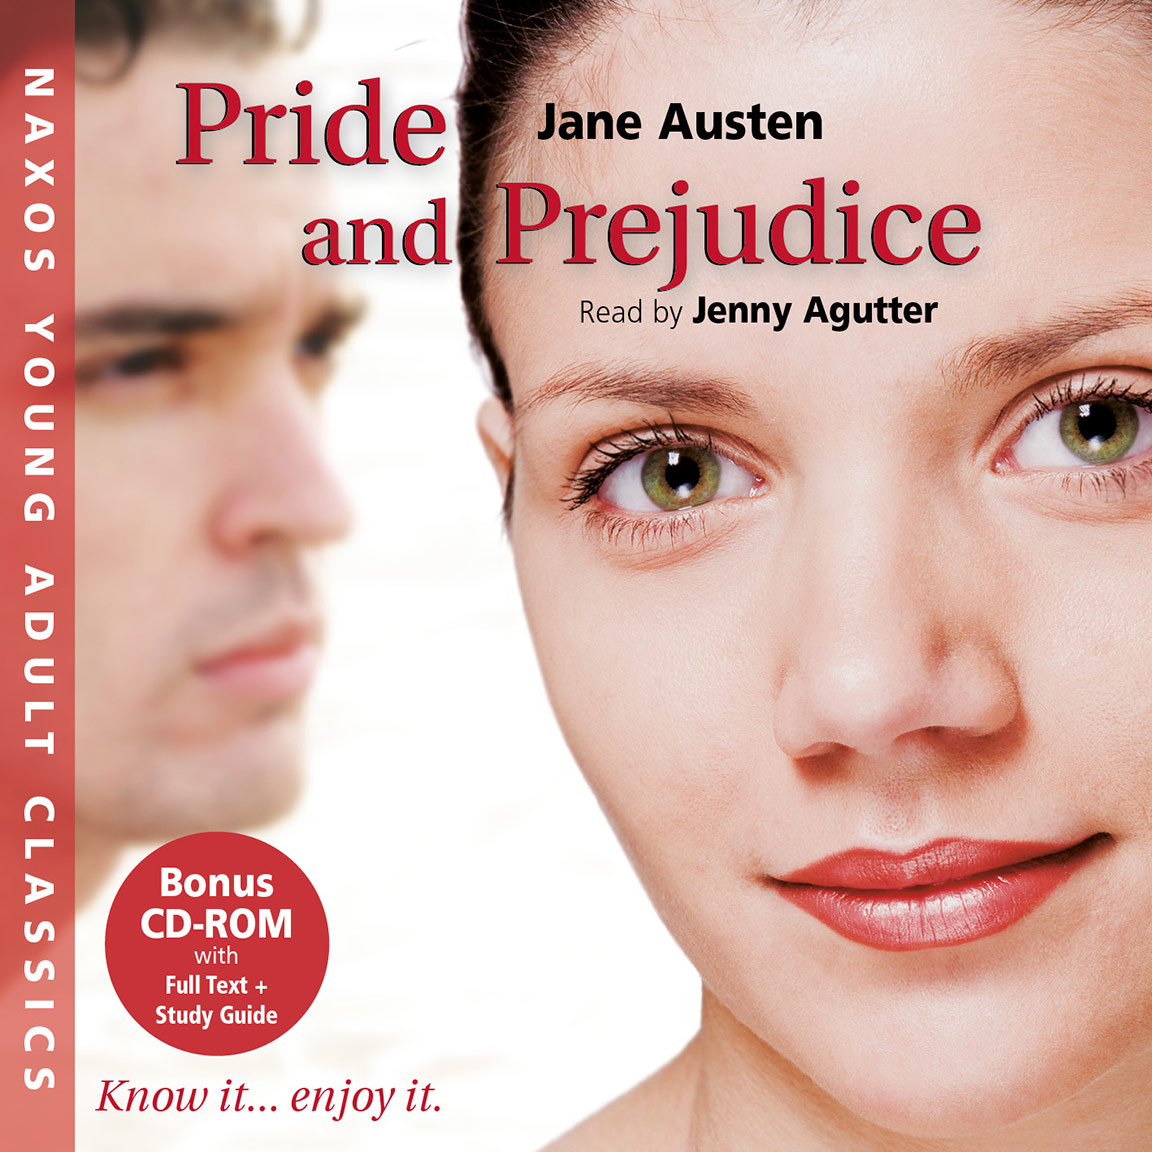 An analysis of pride and prejudice a play by william shakespeare